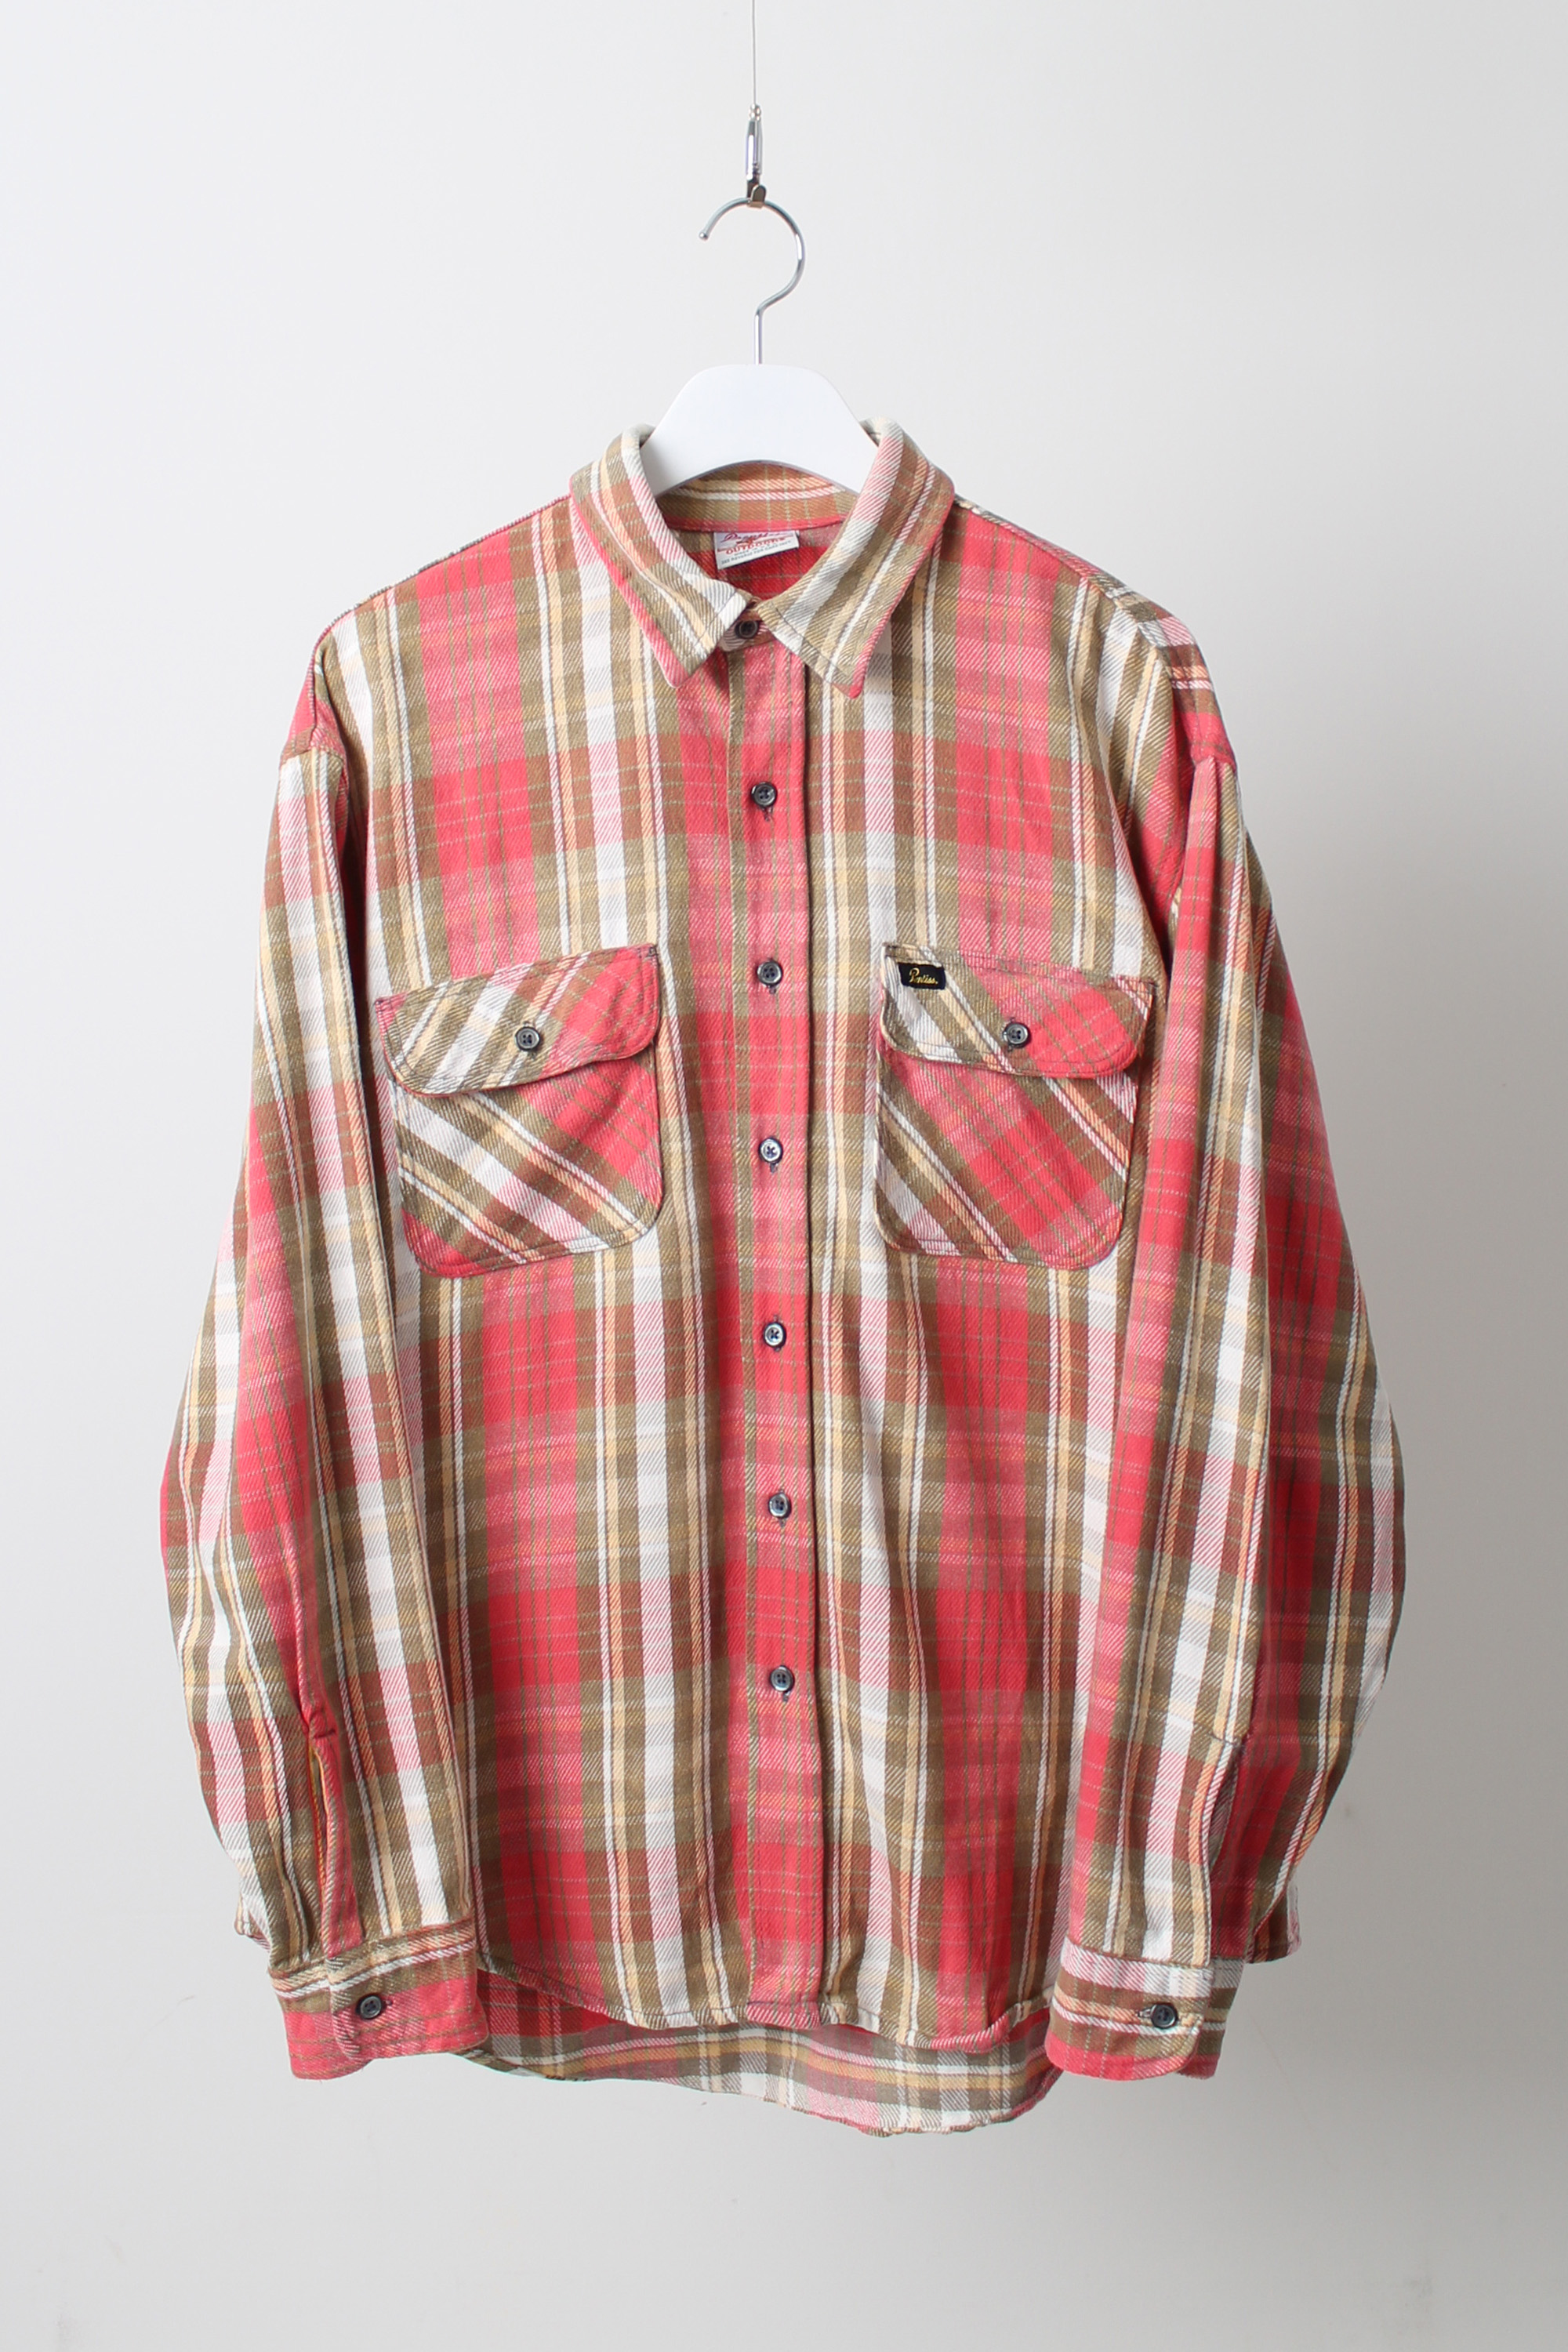 Vintage Pnentill outdoors heavy flannel shirt